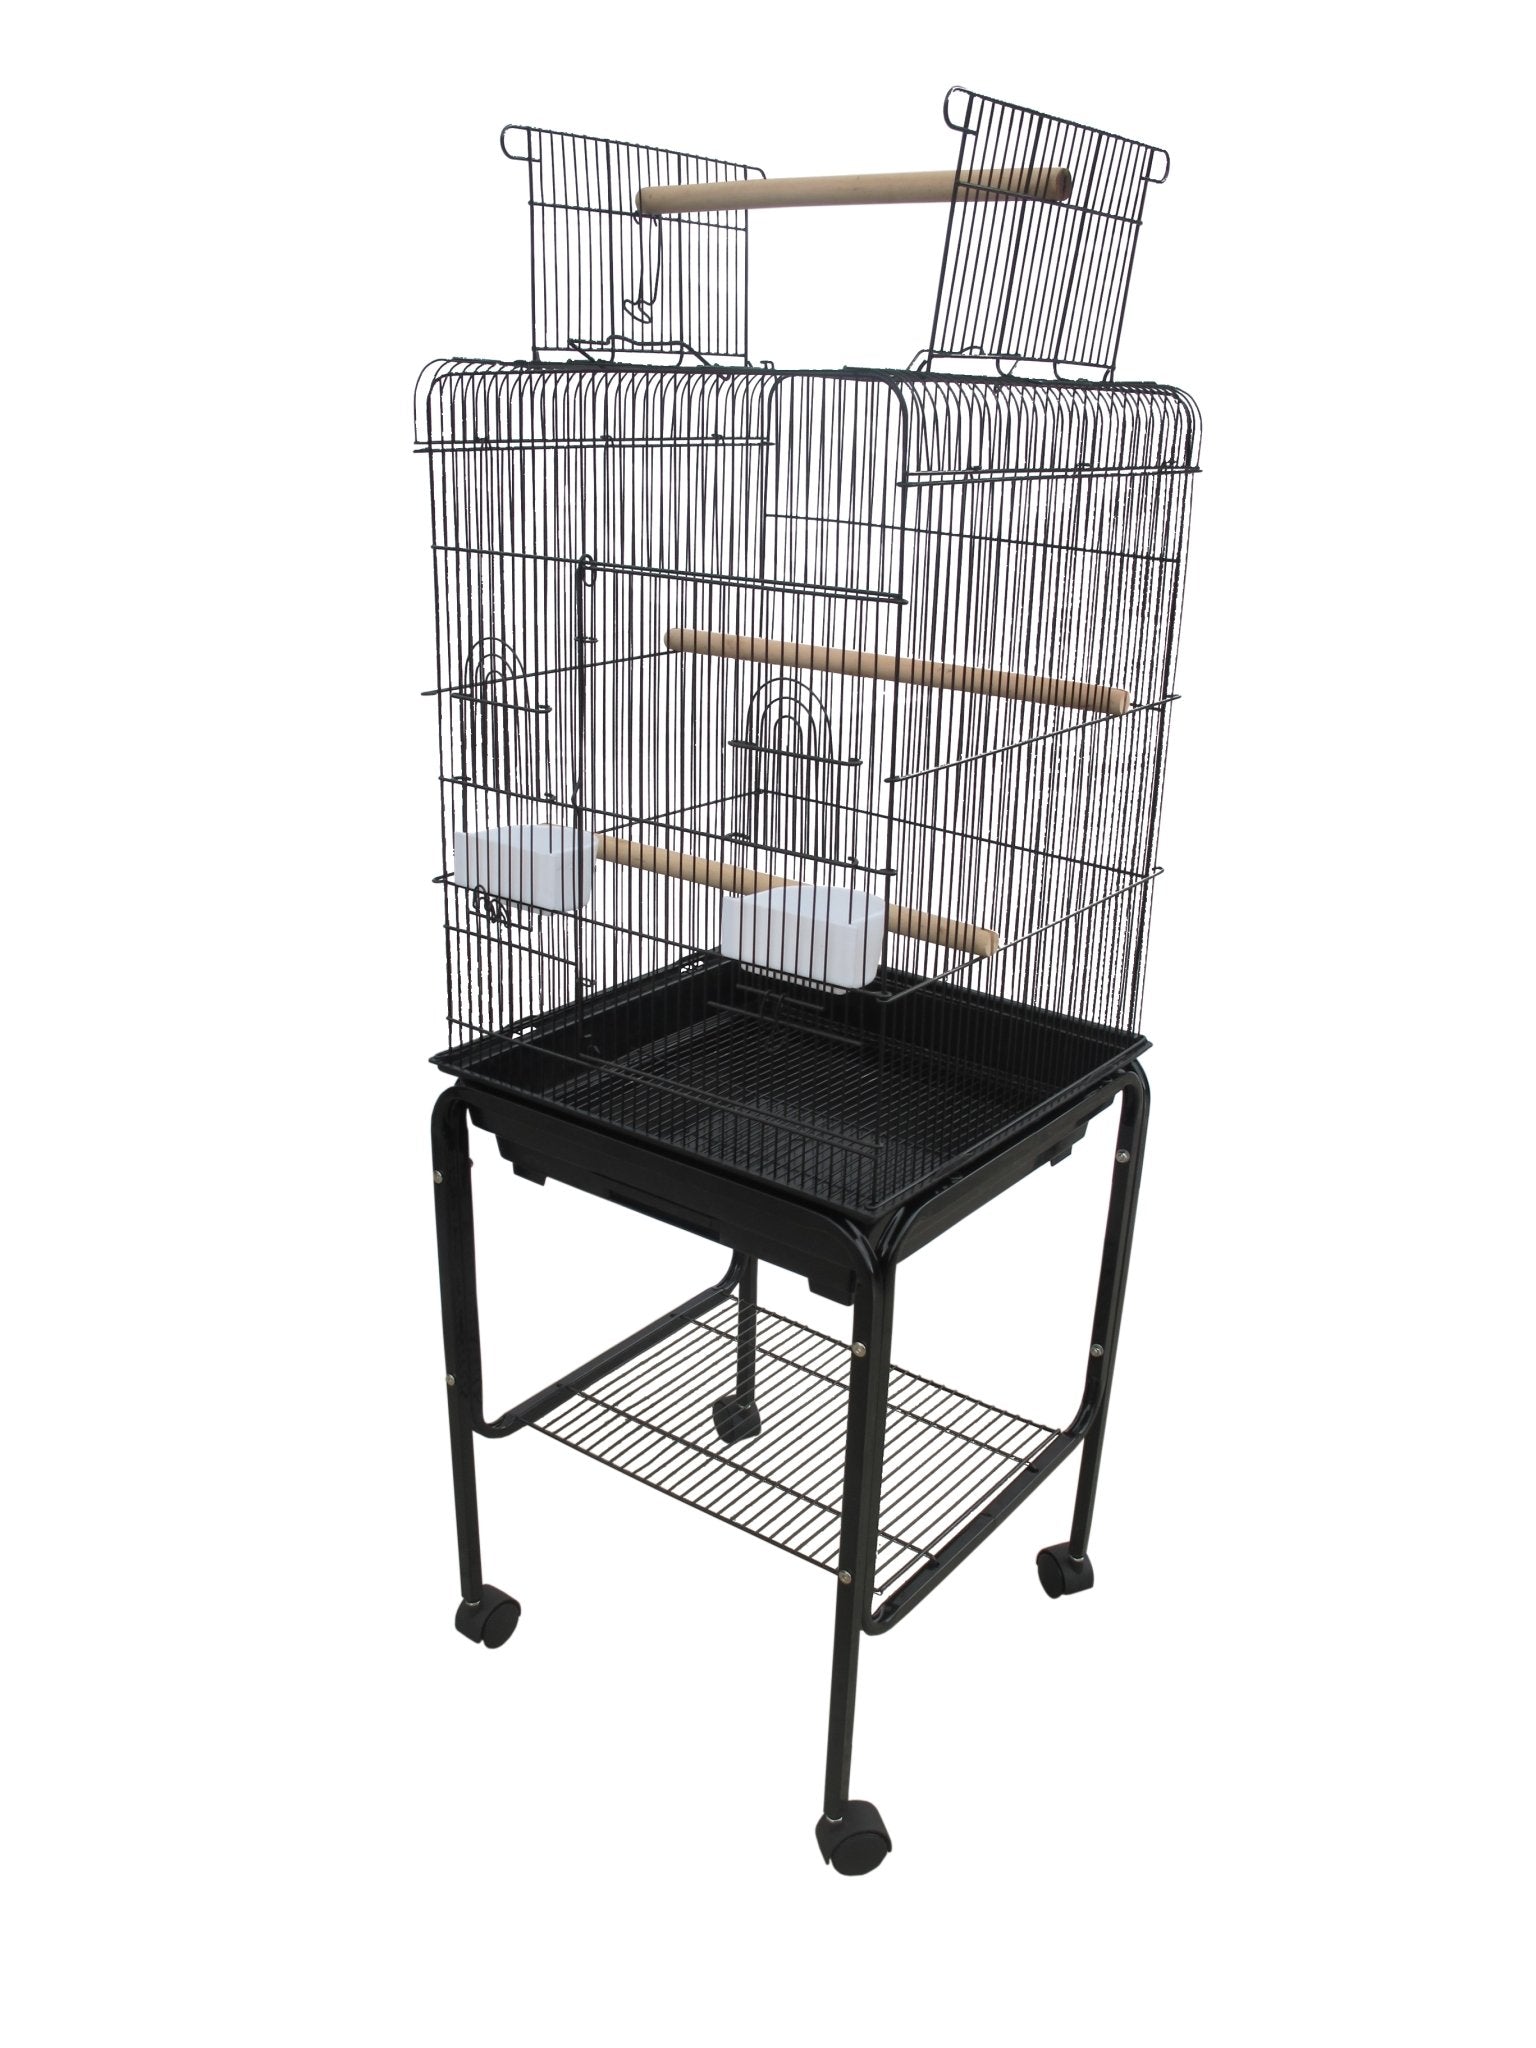 Bono Fido Open Top Budgie Cage and Stand 45138 46 x 46 x 120cm - Woonona Petfood & Produce